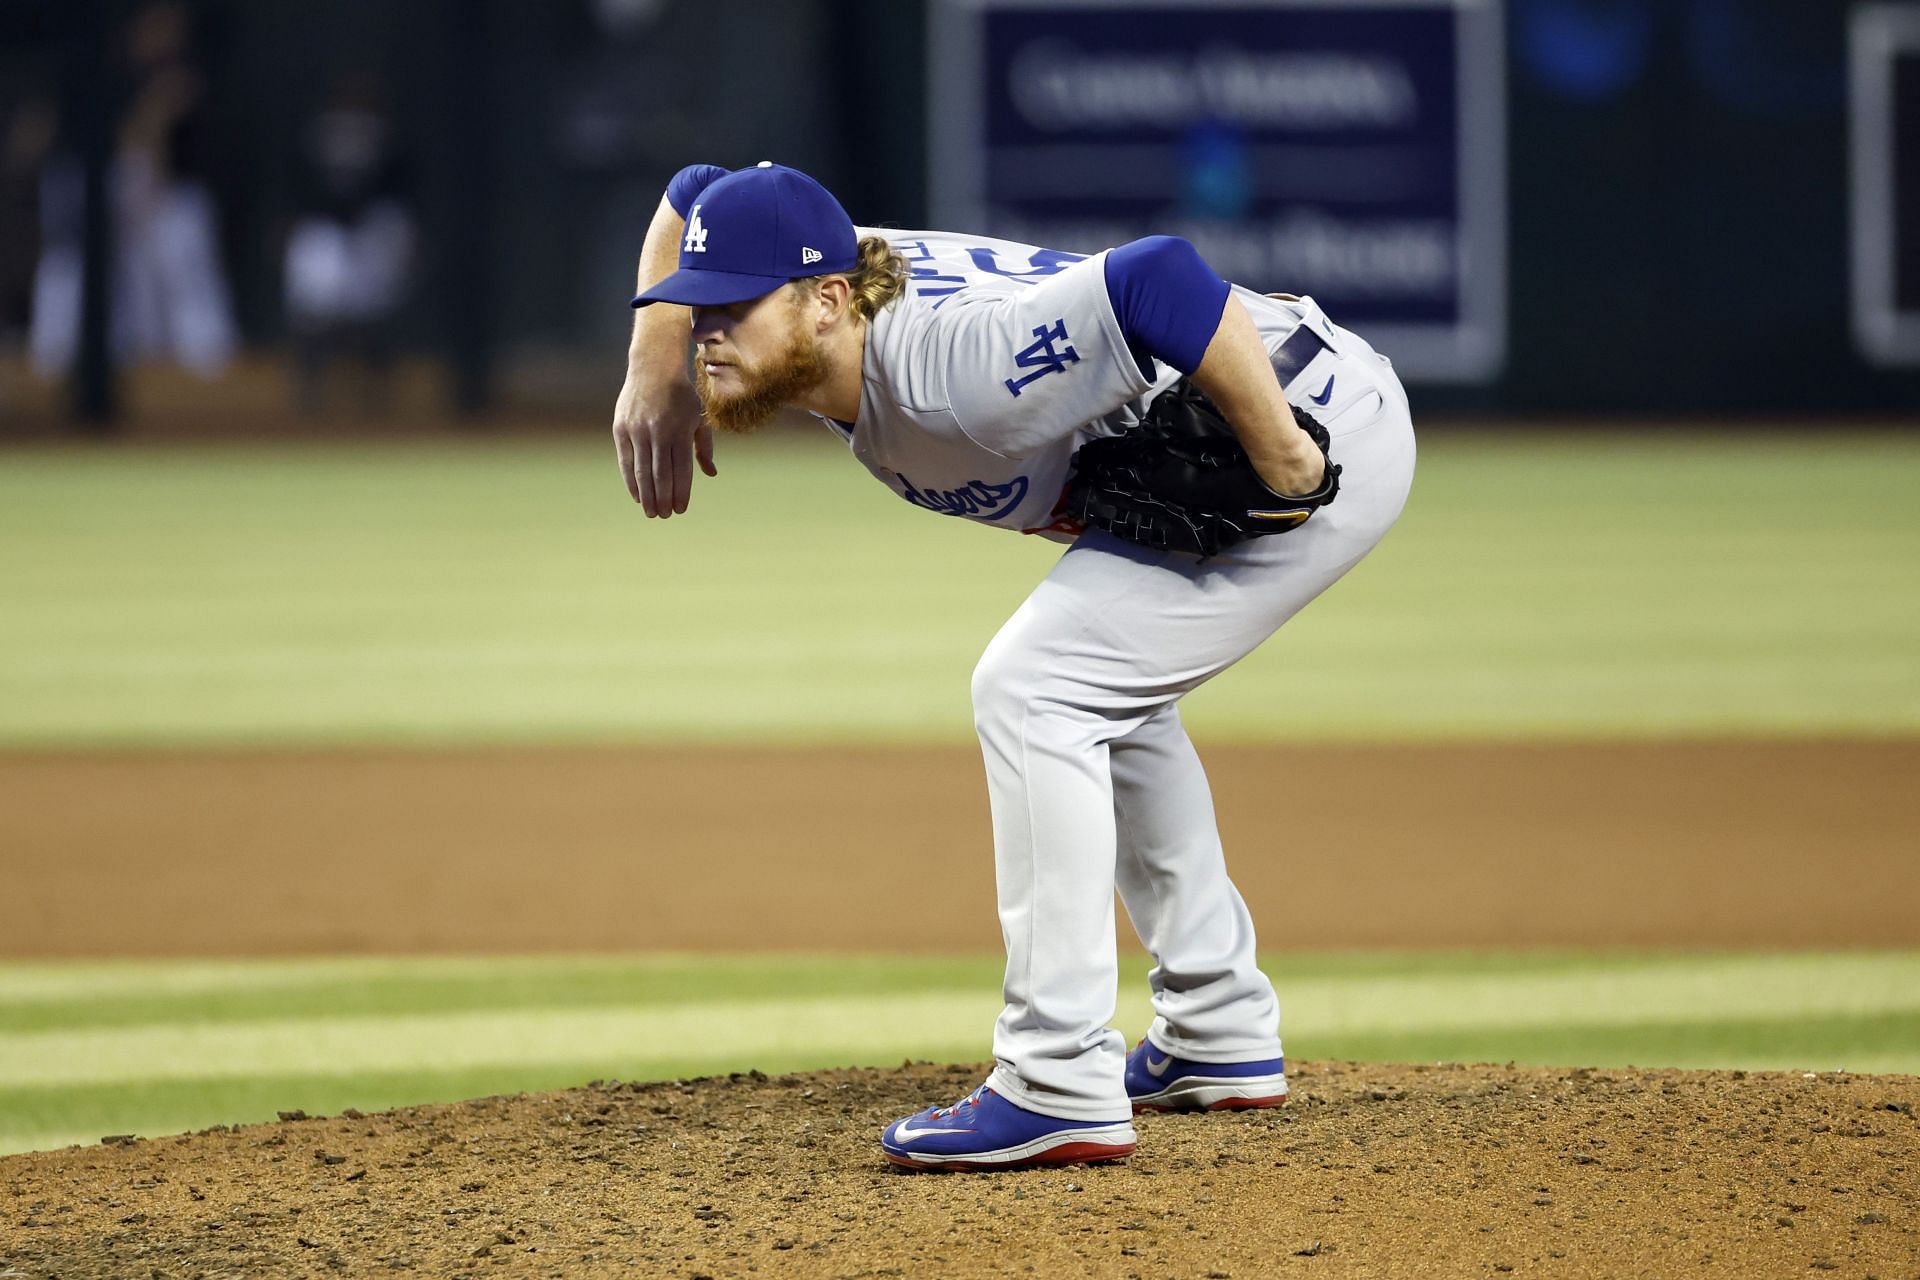 Philadelphia Phillies reportedly sign relief pitcher Craig Kimbrel to 1